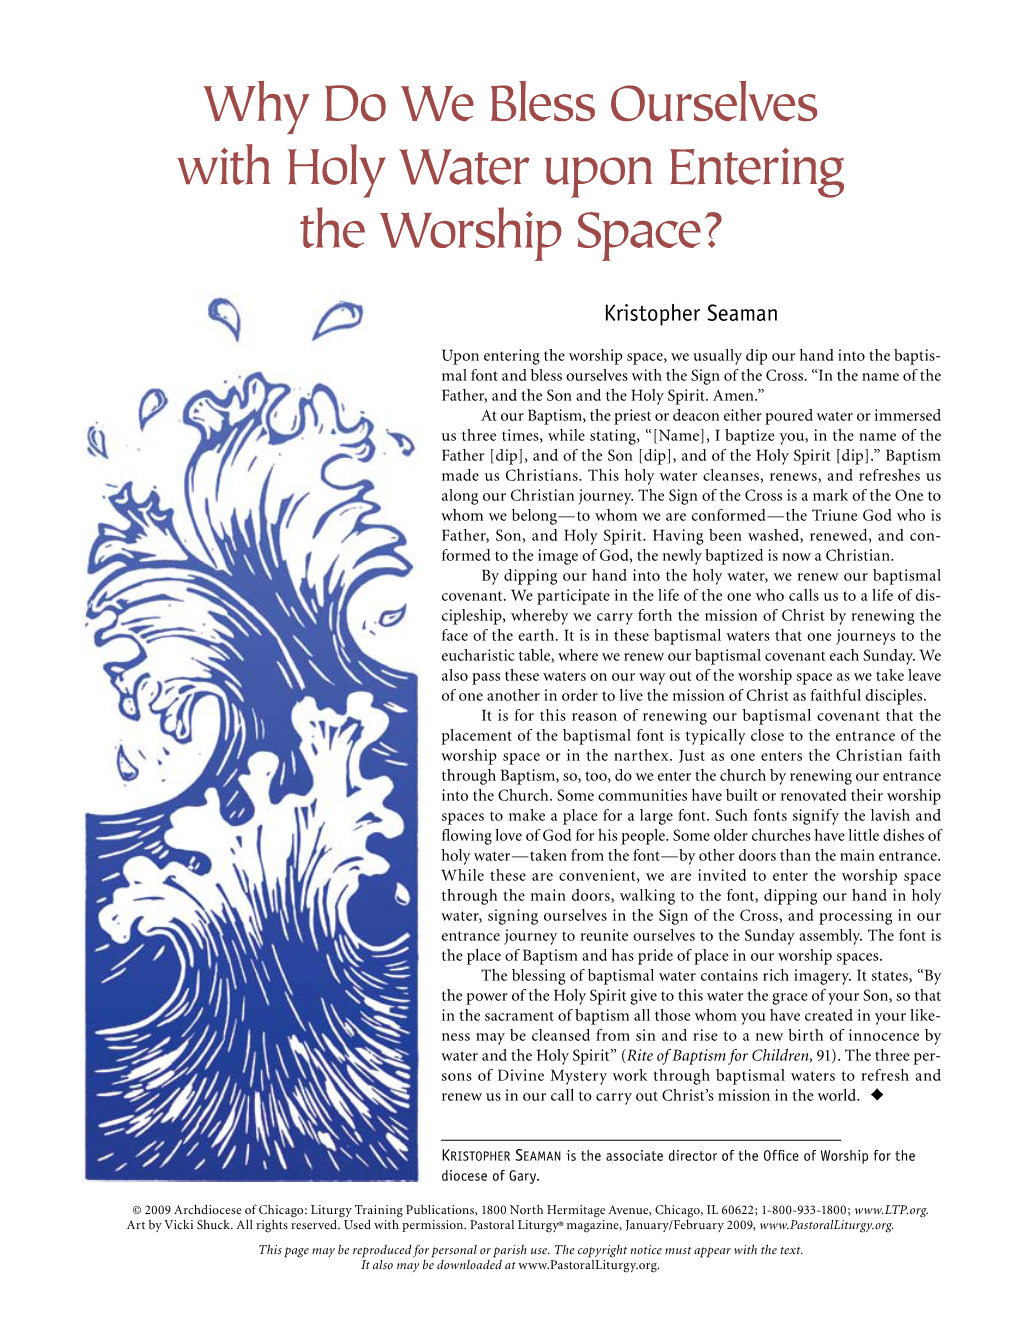 Why Do We Bless Ourselves with Holy Water Upon Entering the Worship Space?